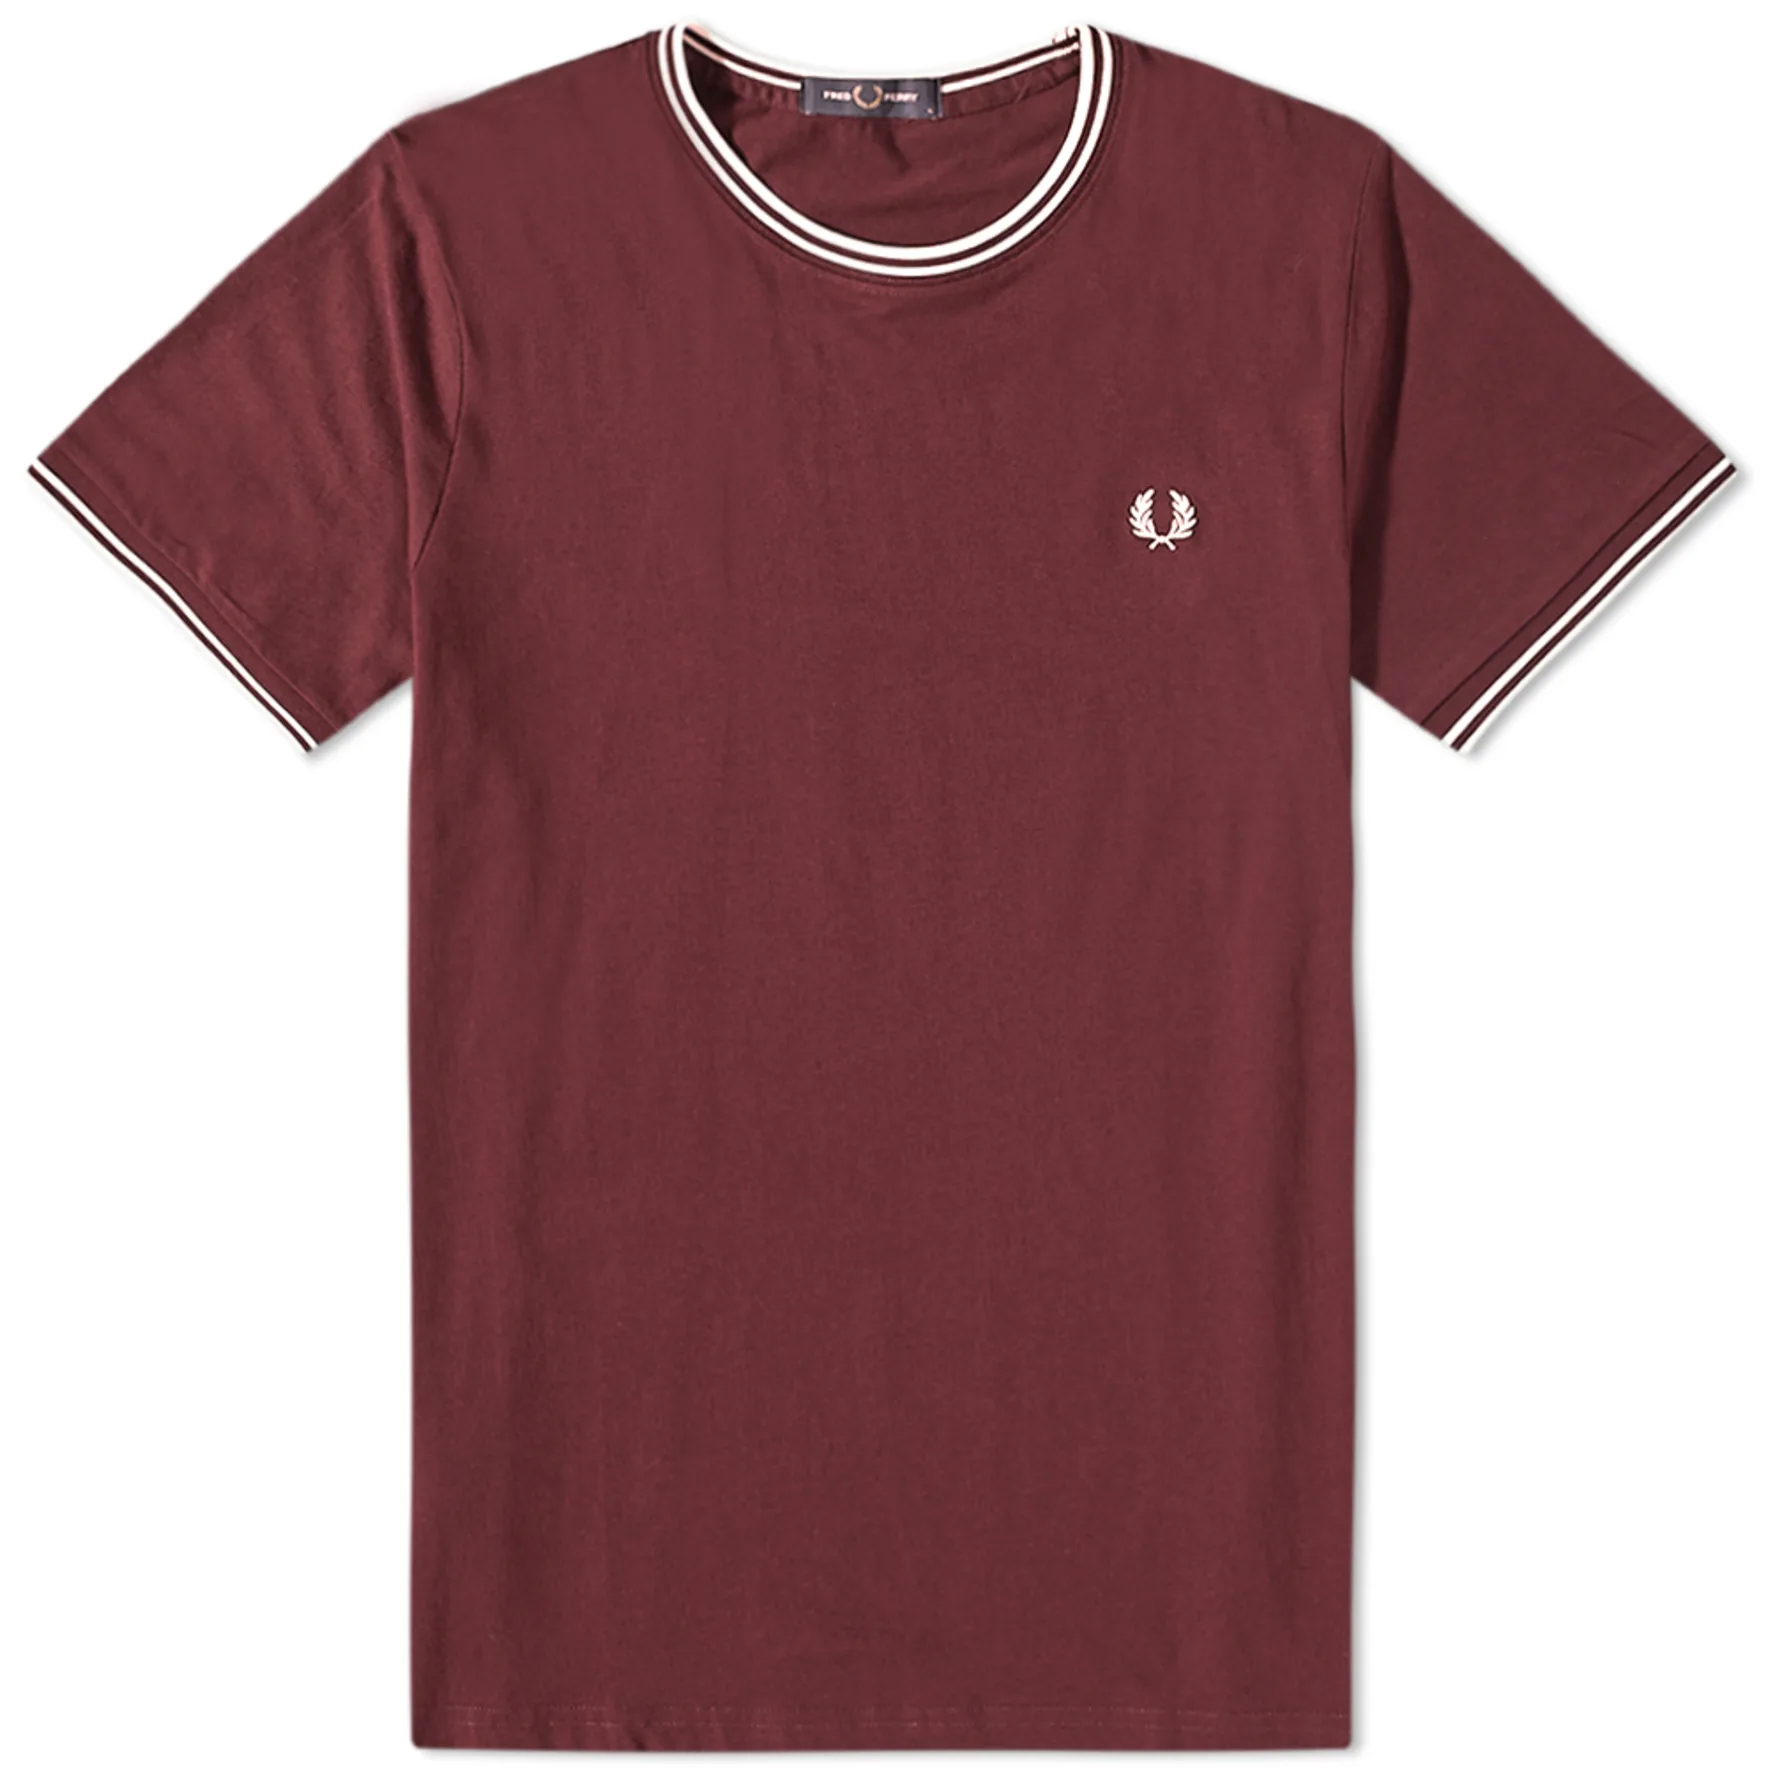 Футболка Fred Perry Authentic Twin Tipped, бордовый футболка fred perry slim fit twin tipped polo